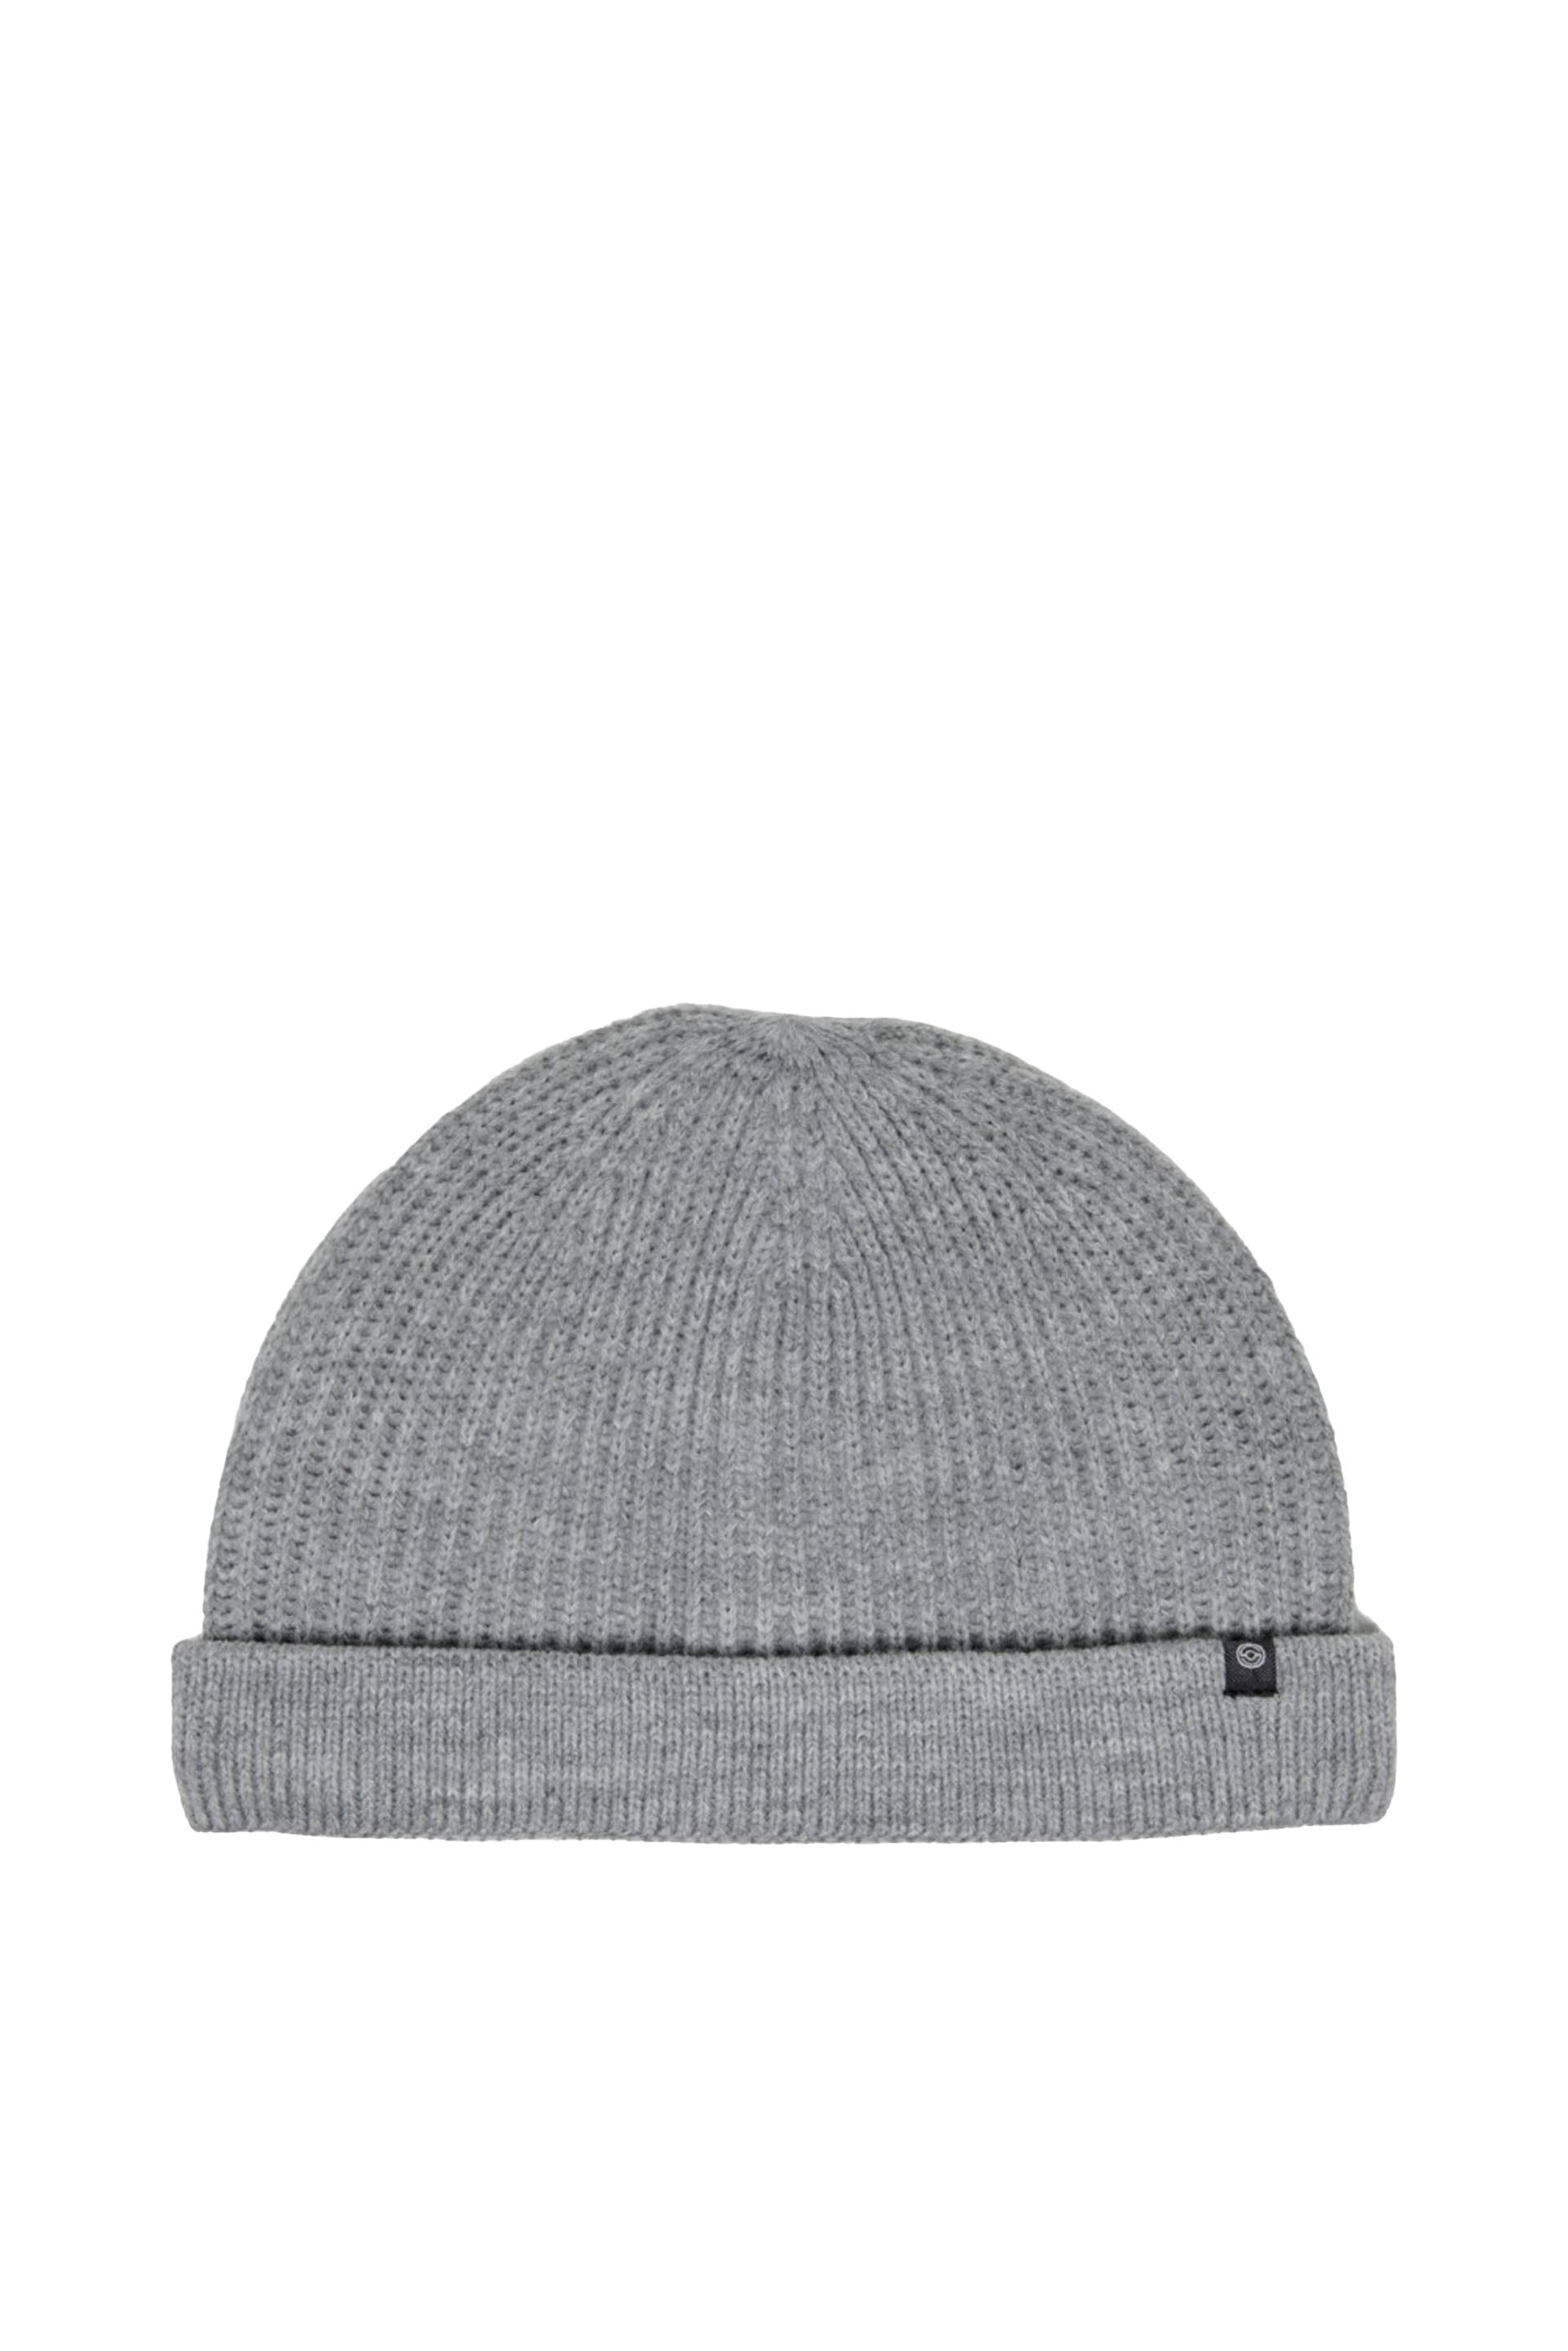 BEANIE Grigio Only & Sons